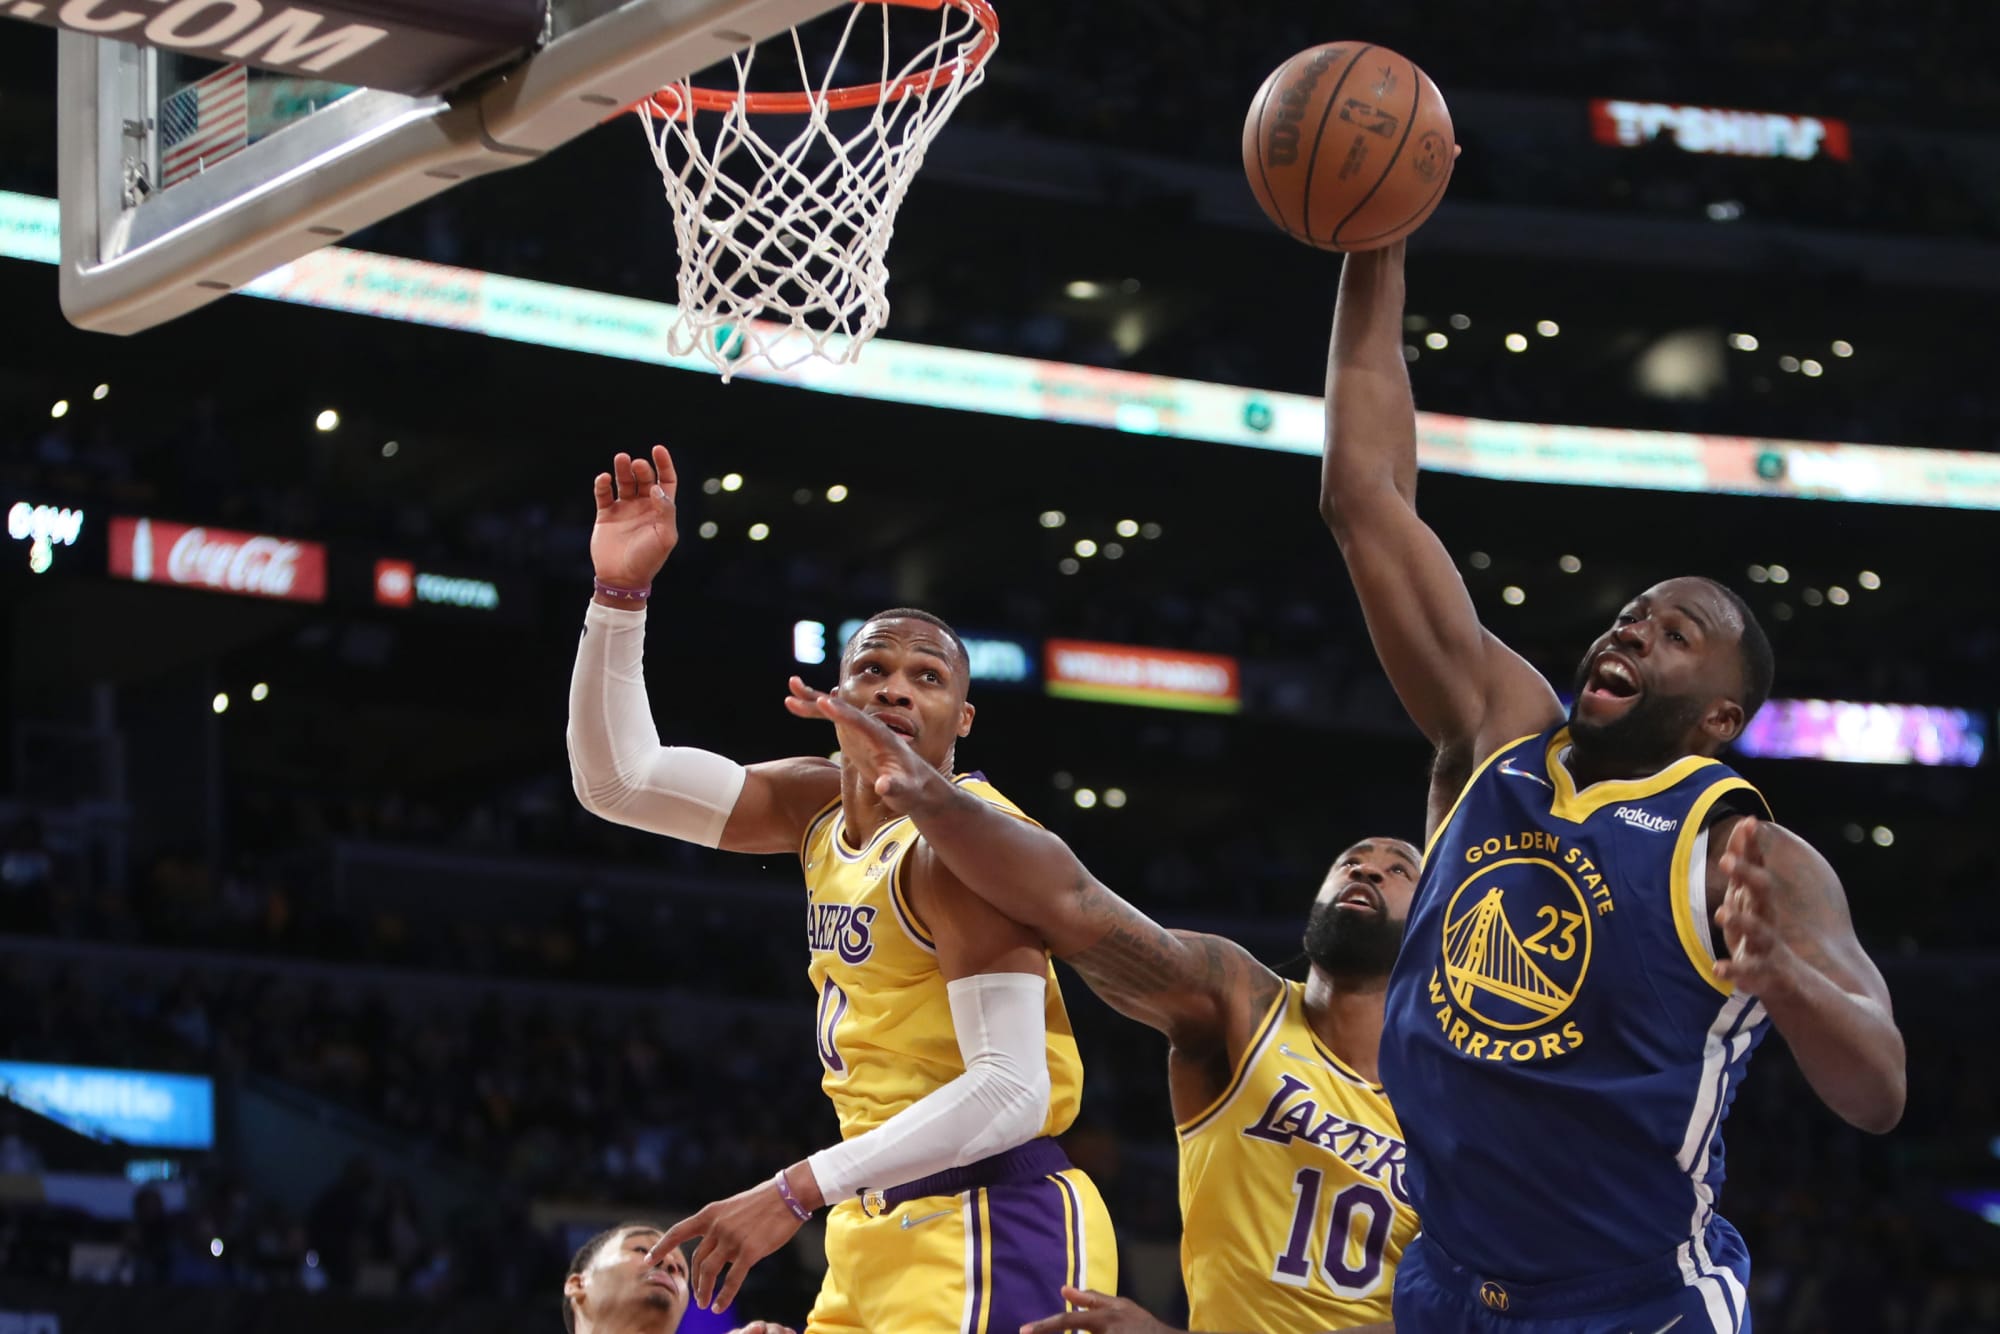 Draymond Green To Analyze NBA Games for Turner While He Keeps Playing